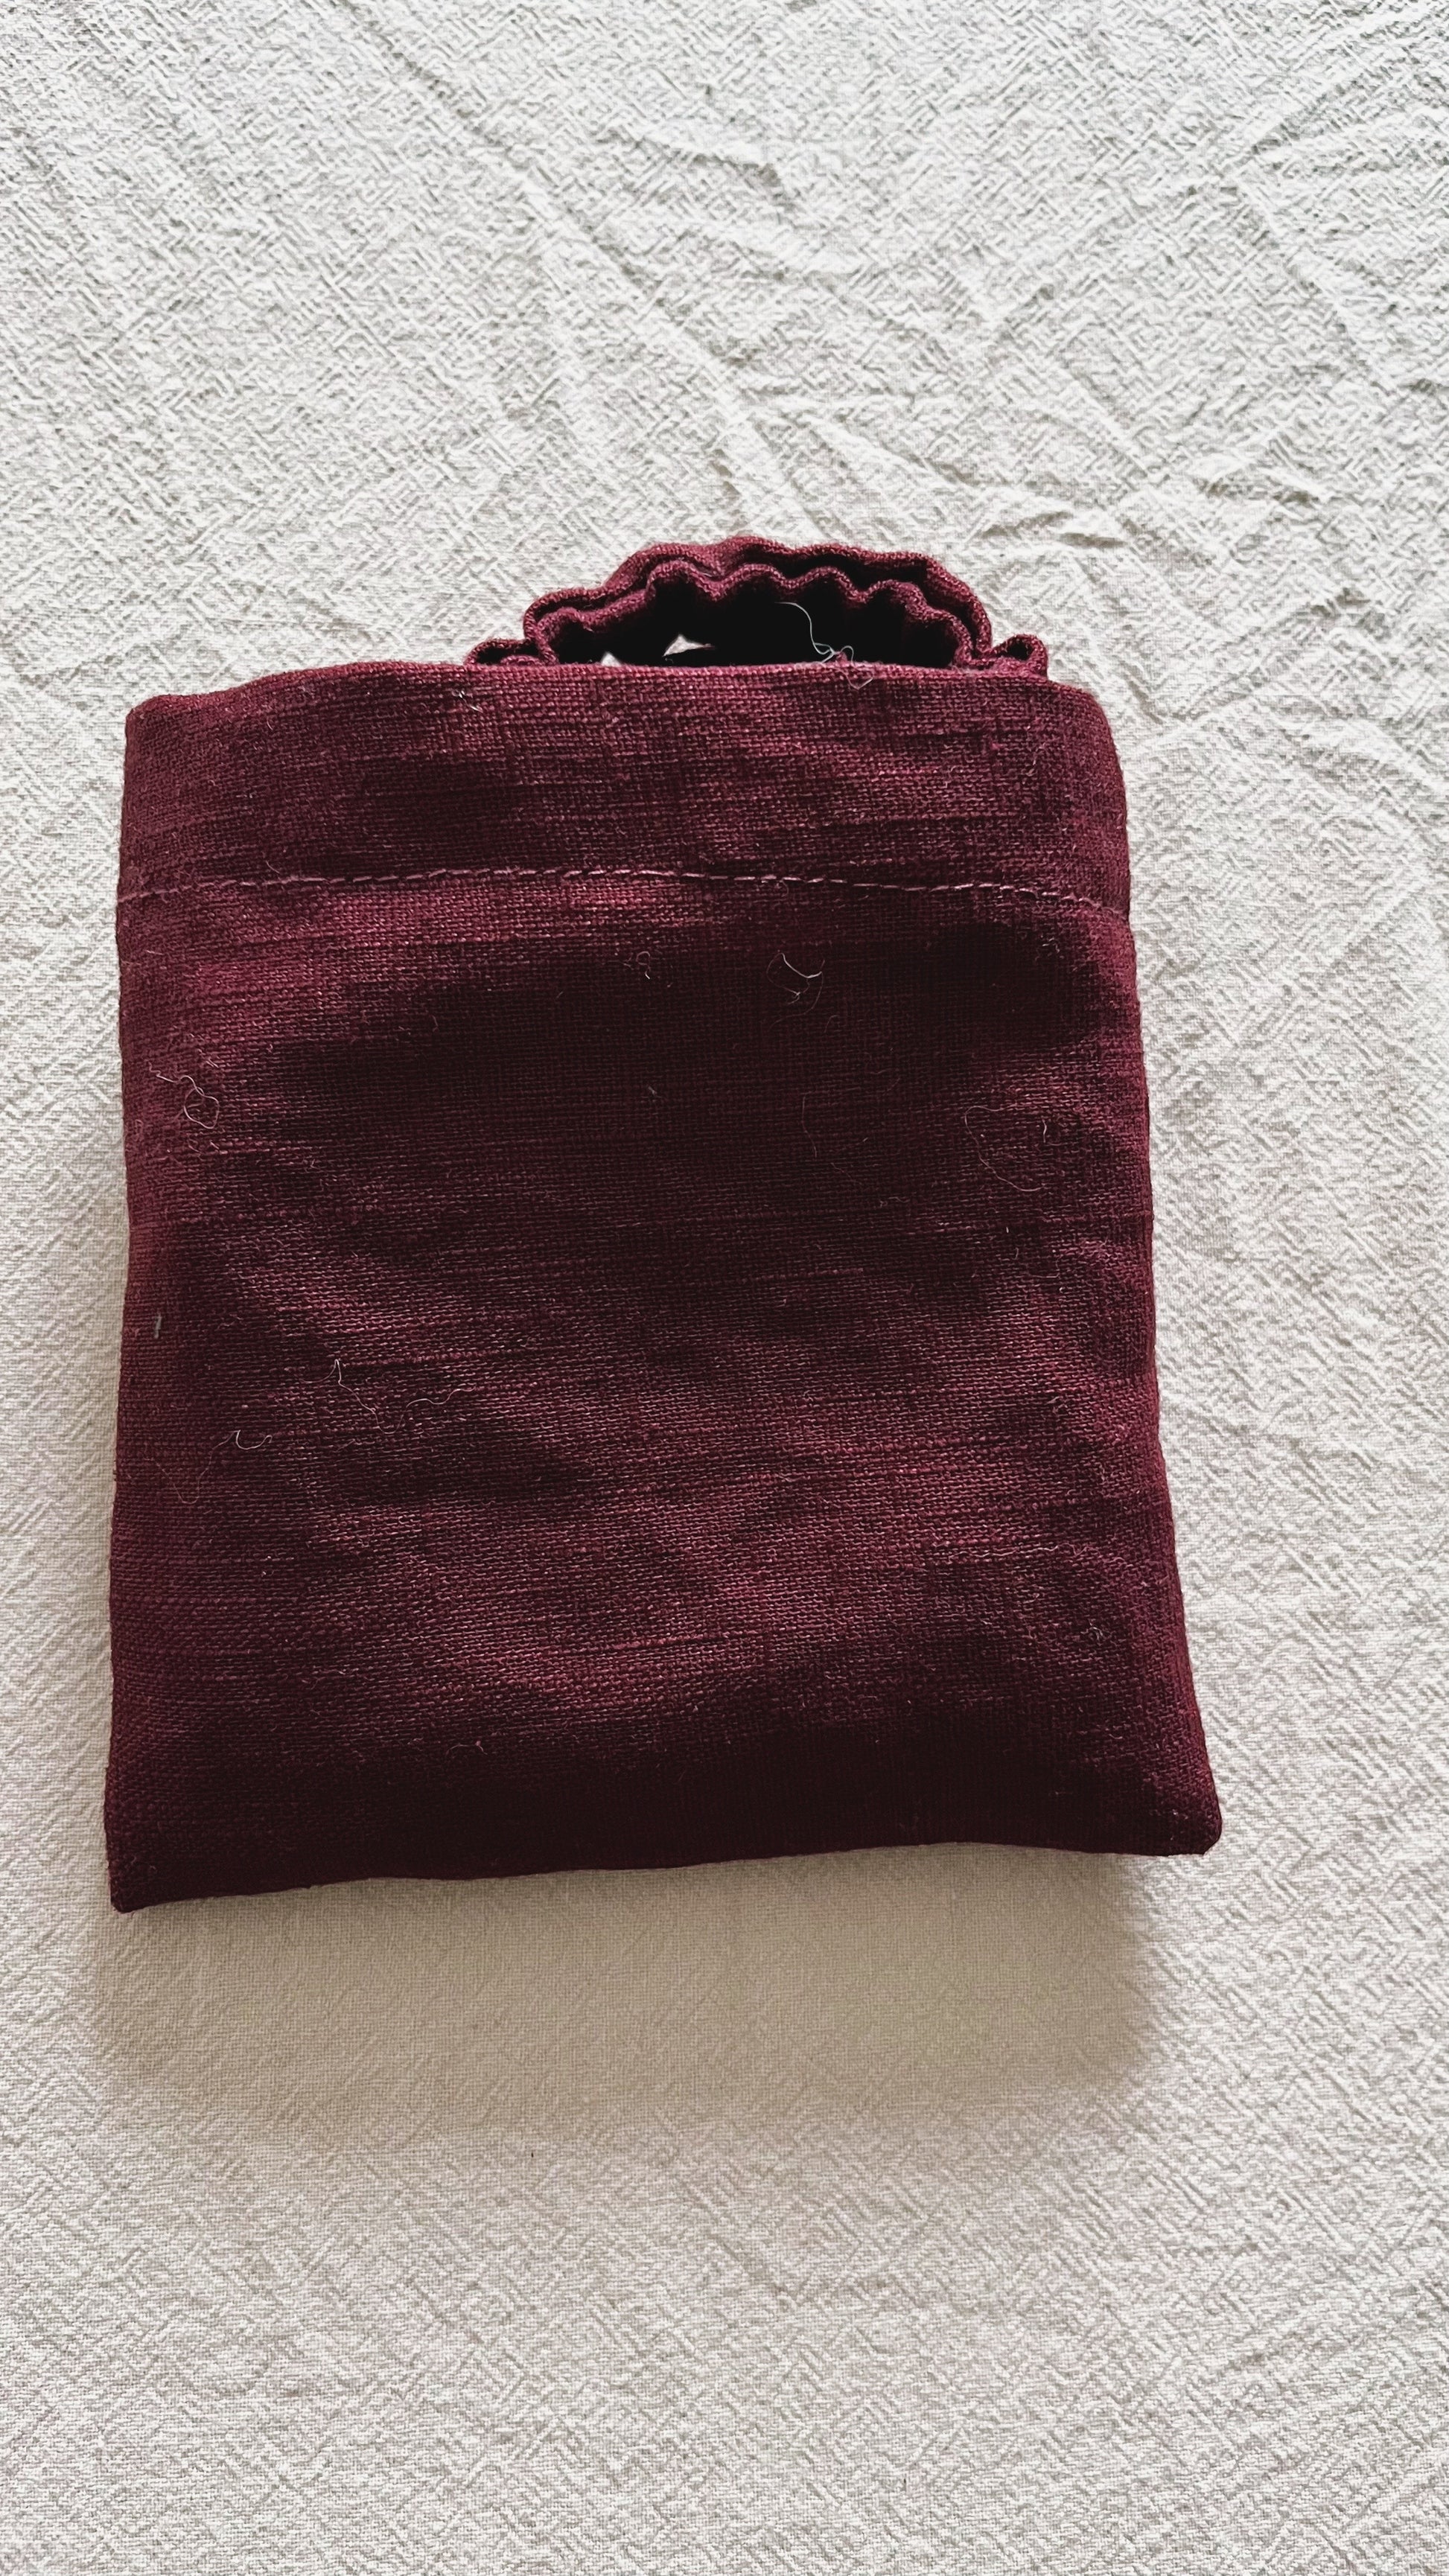 Washed linen sleep mask with keeper pouch - Mulberry red - Walker & Walker